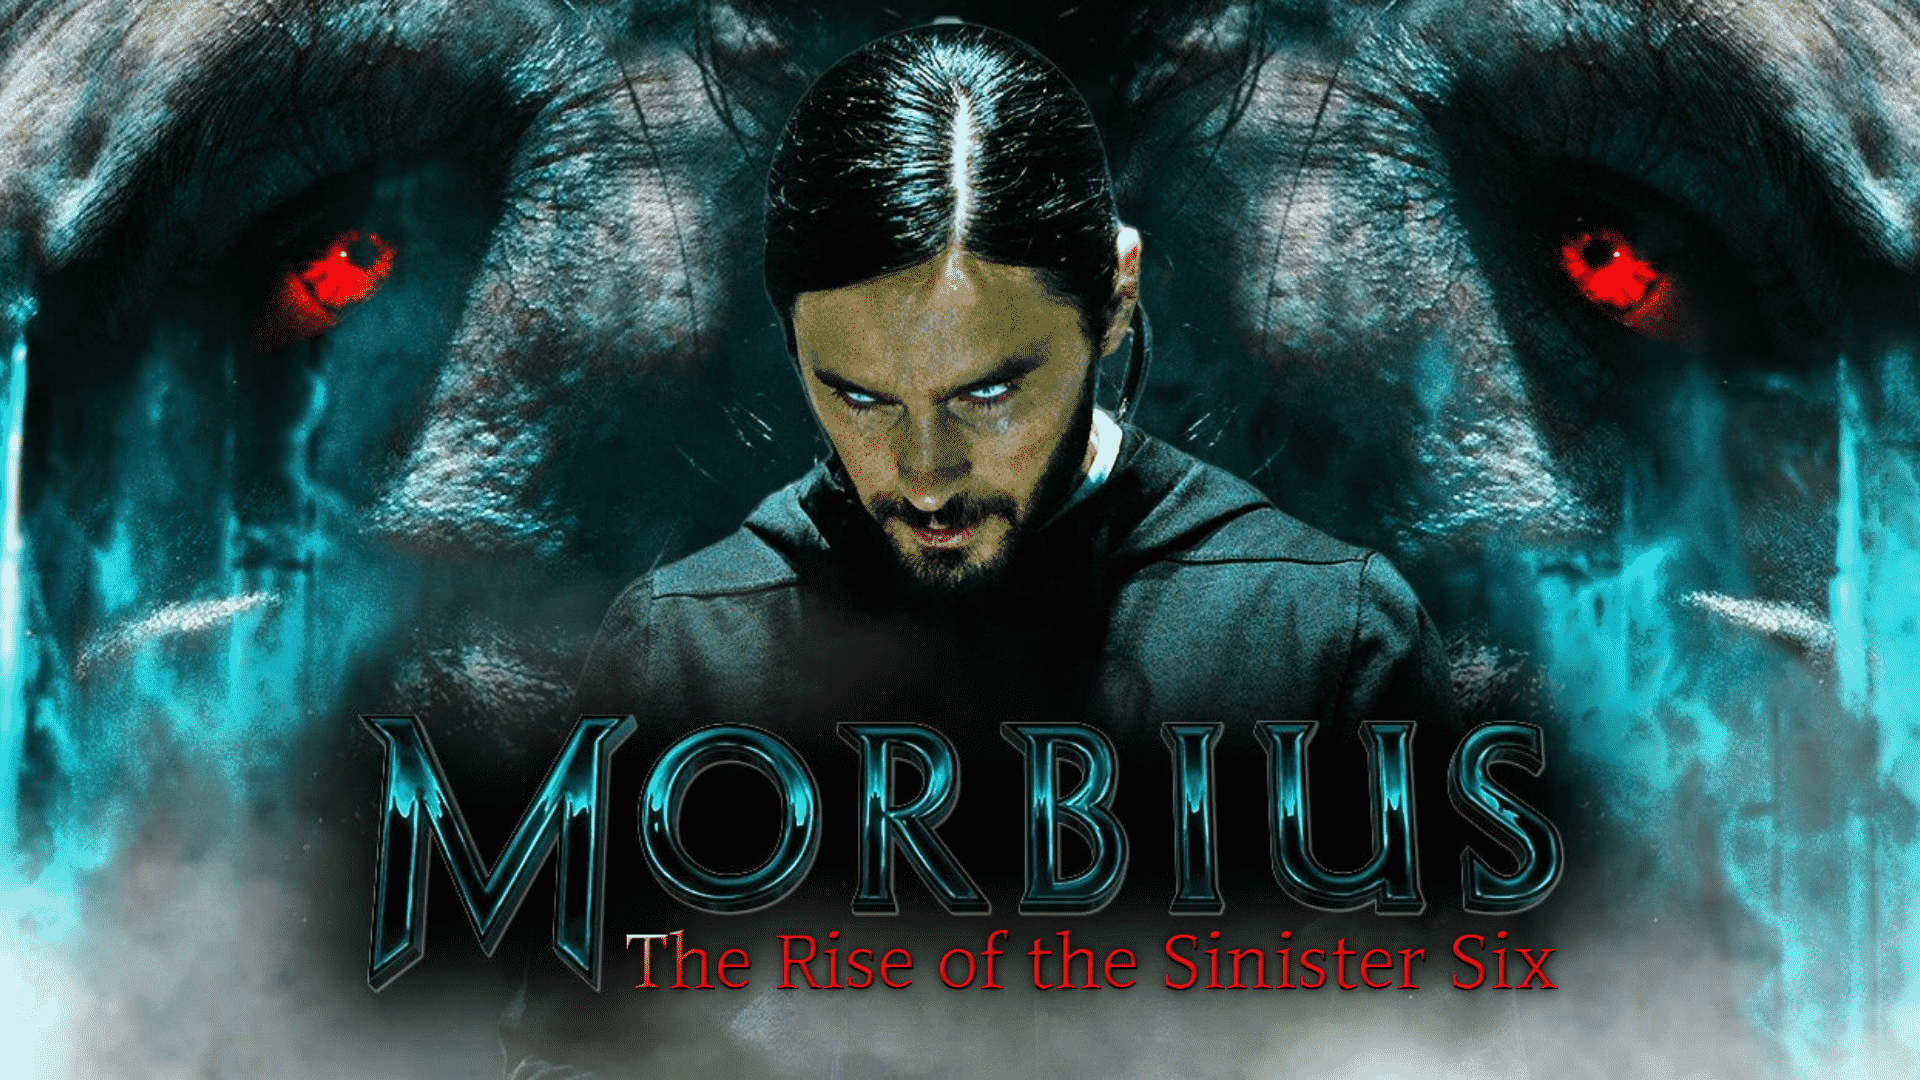 Morbius: The RISE of the sinister six